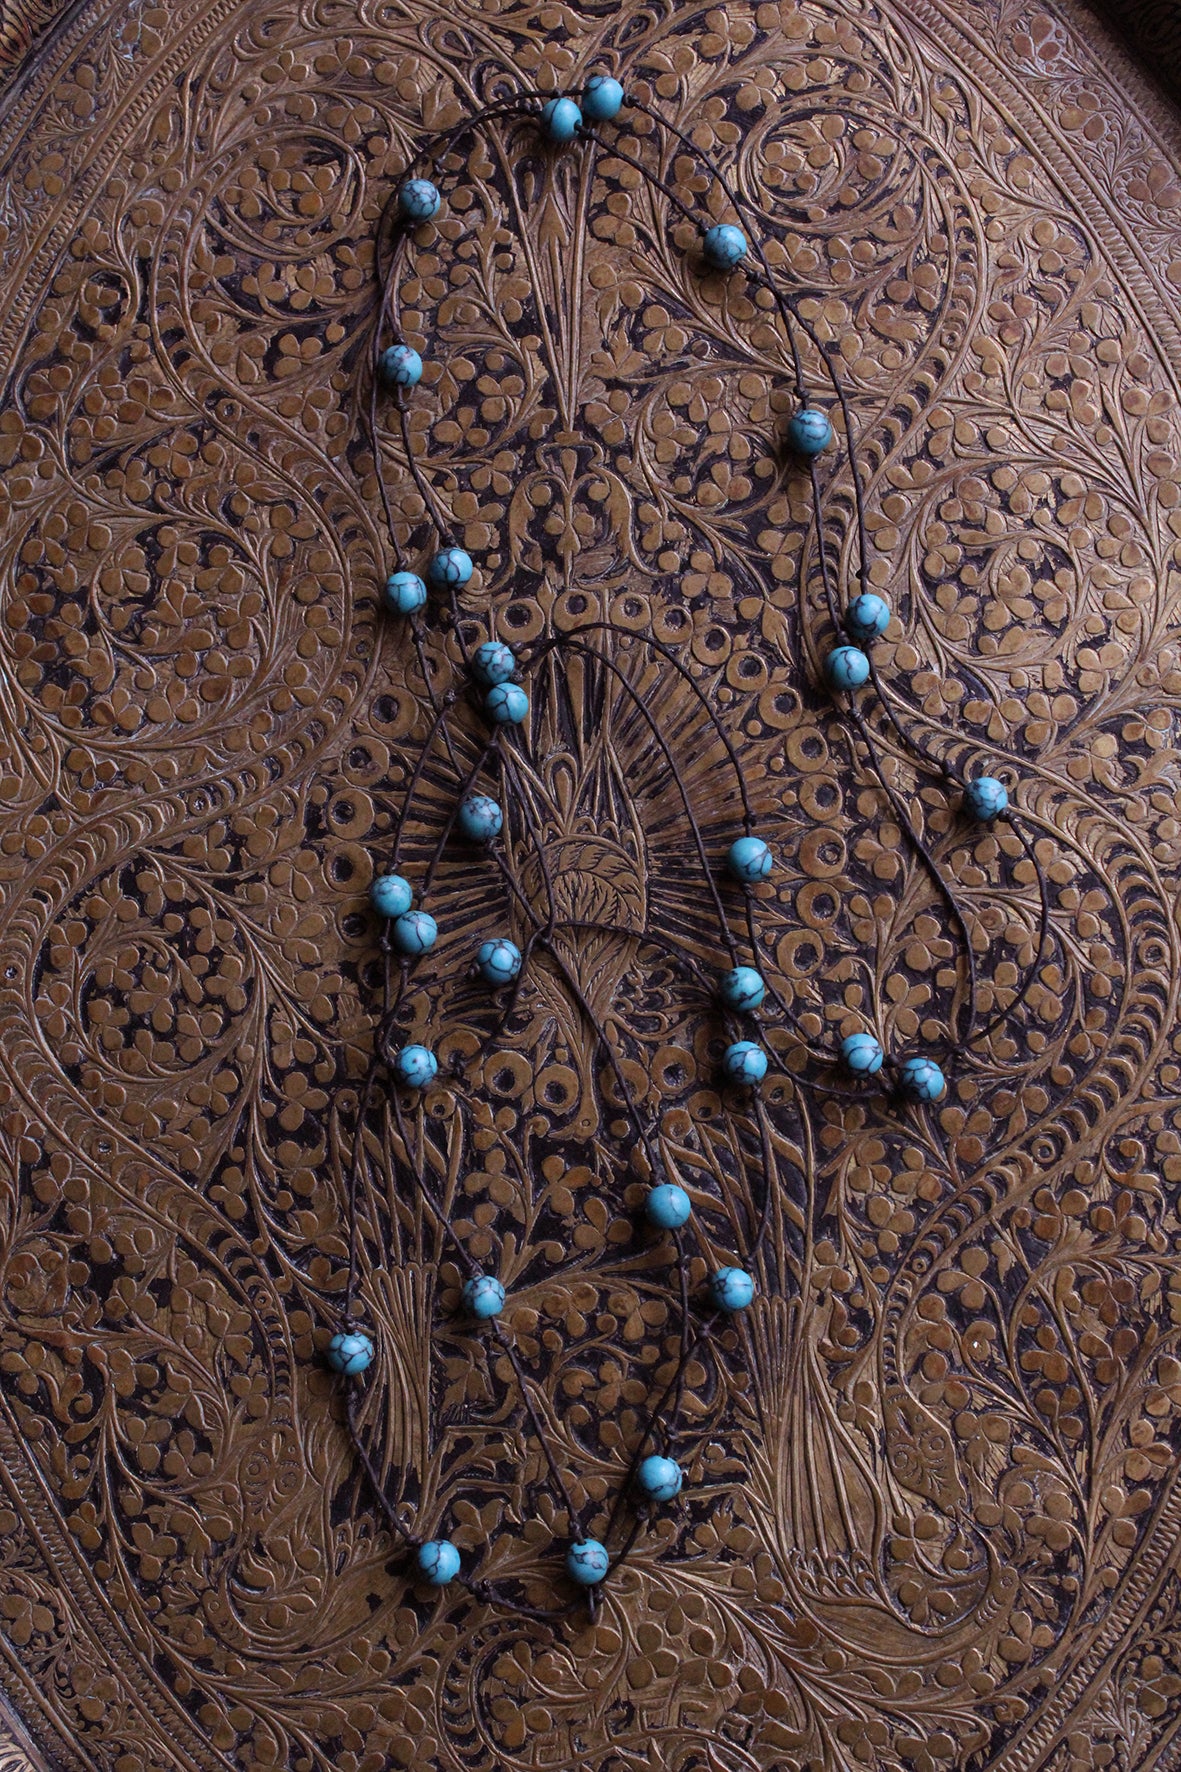 Old Necklace/Garland Wreath Decoration - The Resting Hour -  2